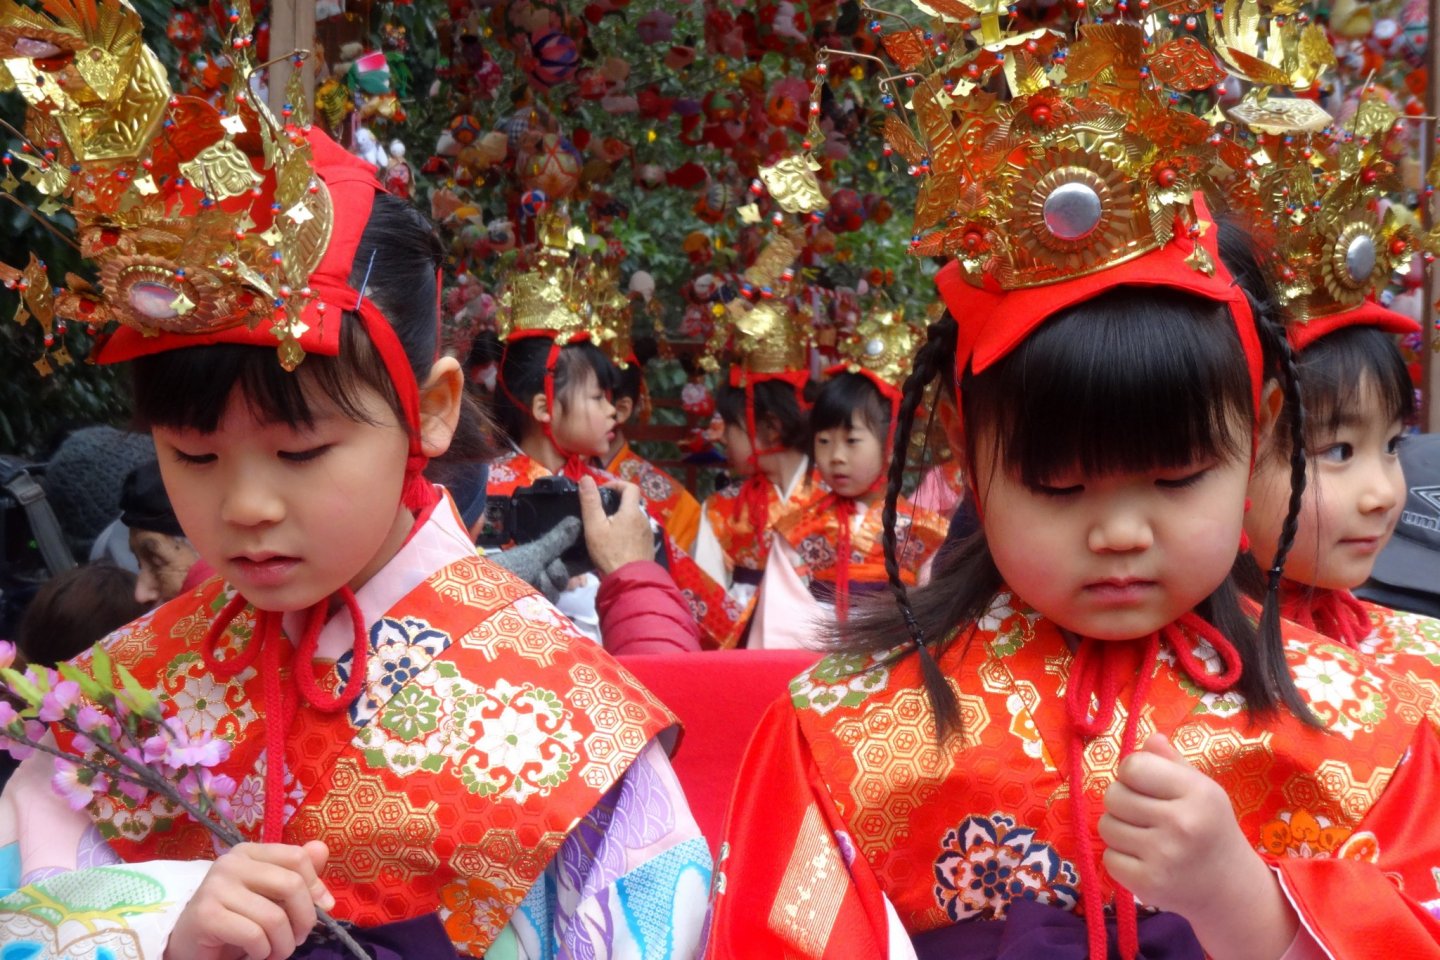 Young girls board floats for the opening parade of Yanagawa's Hina festivities